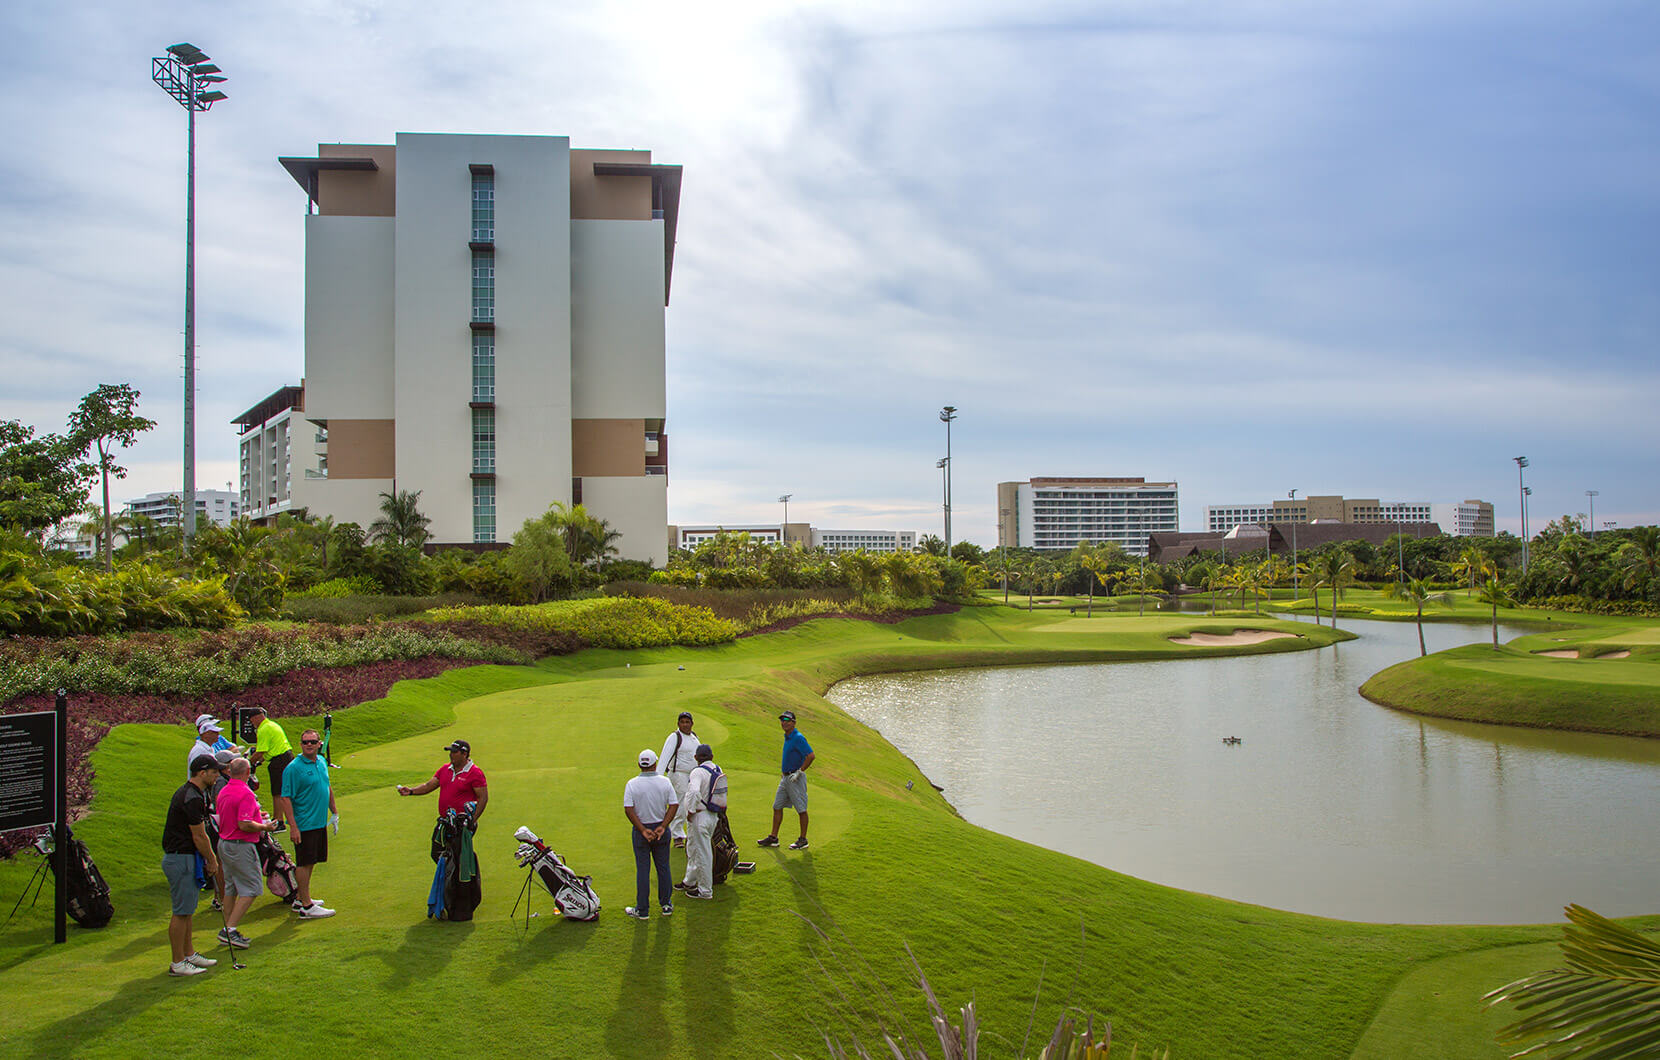 The resort makes the perfect backdrop to this stunning 10-hole course.